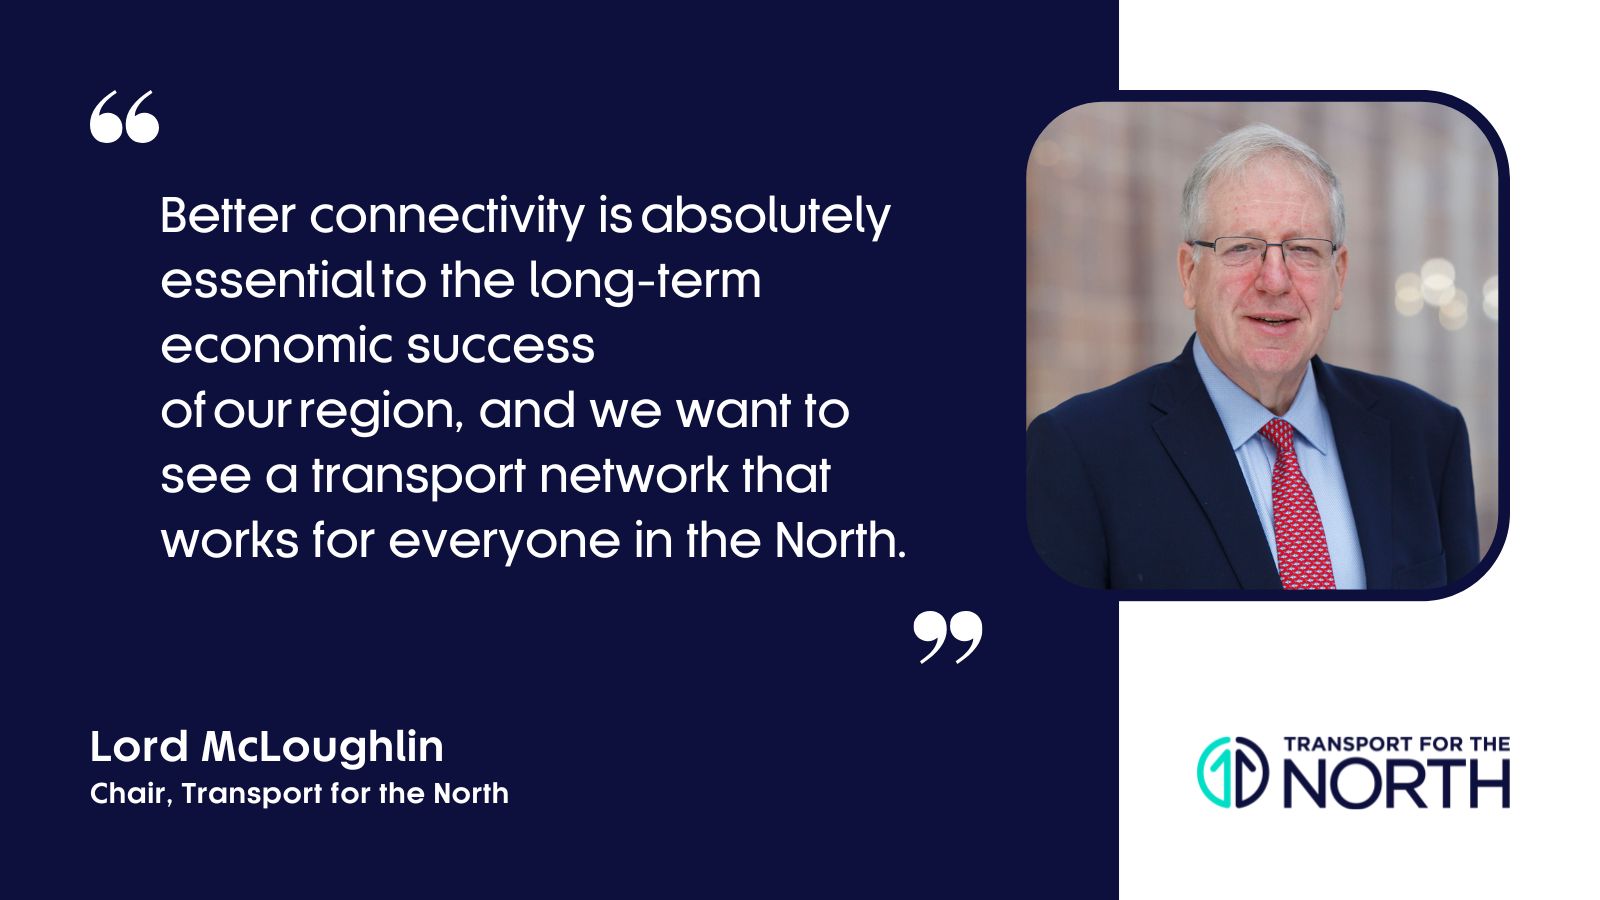 Lord McLoughlin, Chair of Transport for the North, on the Strategic Transport Plan